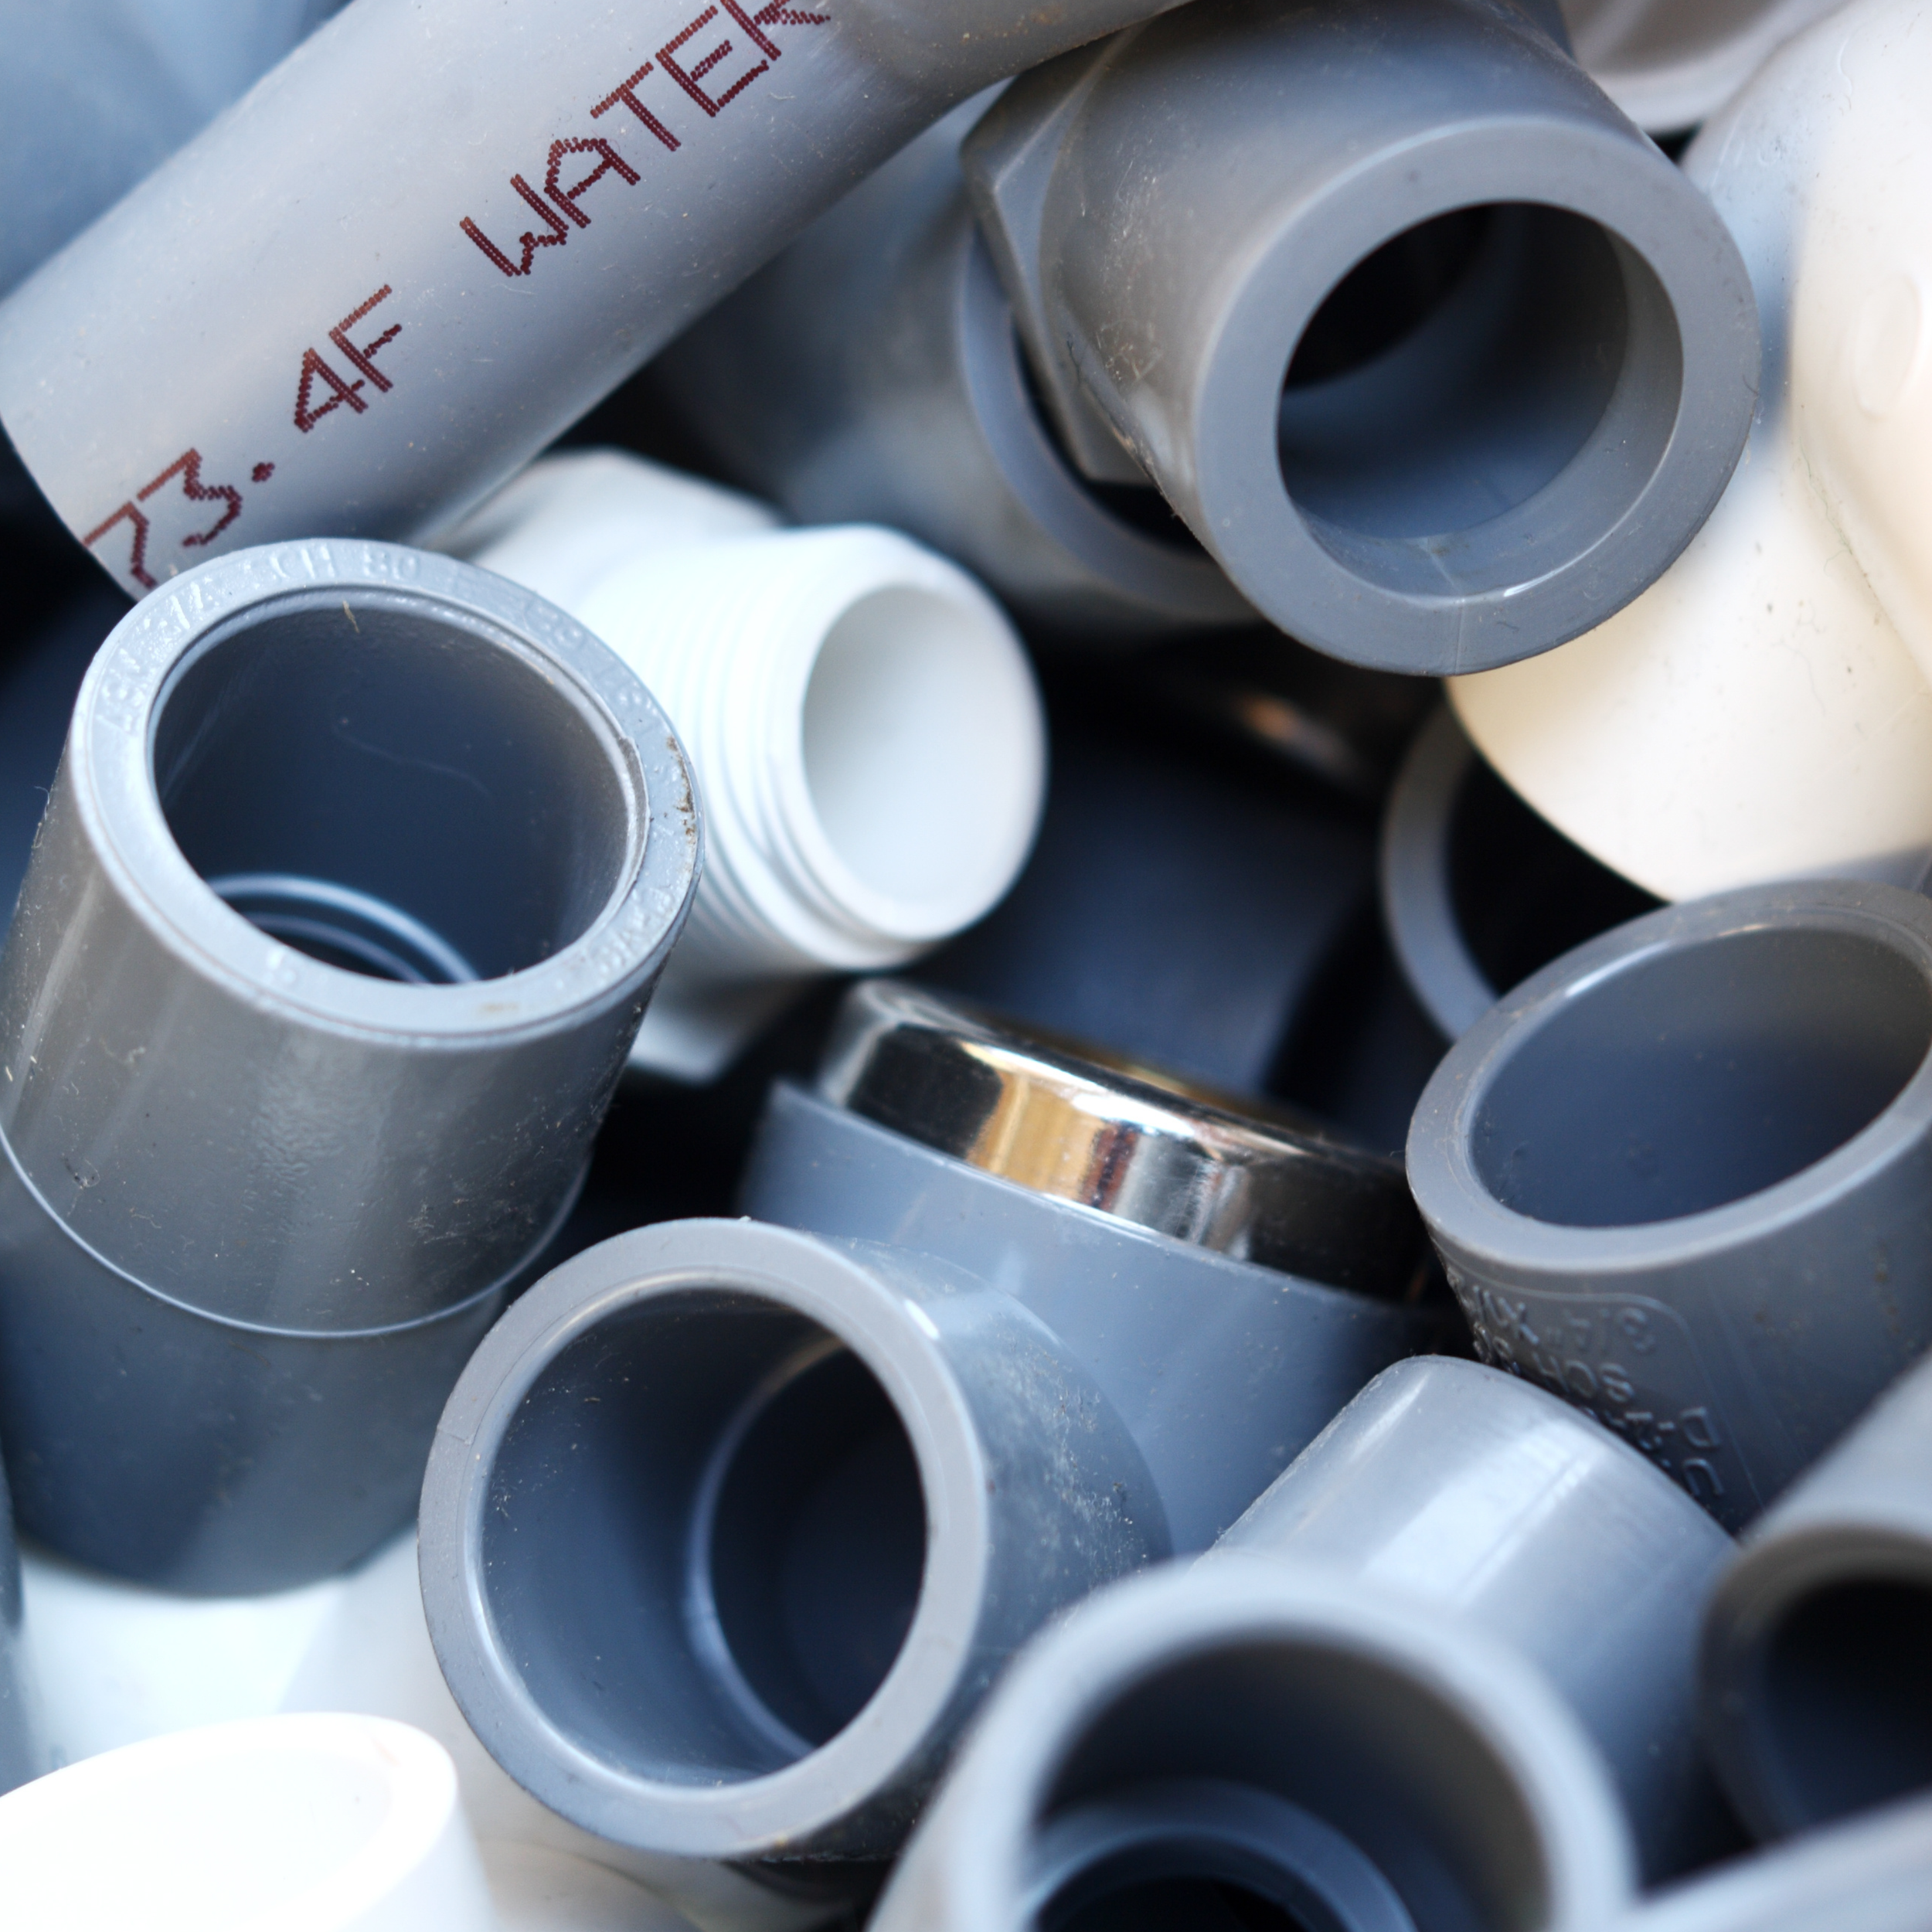 New Report Raises Questions About Safety of Using PVC Plastic Pipes for Drinking Water